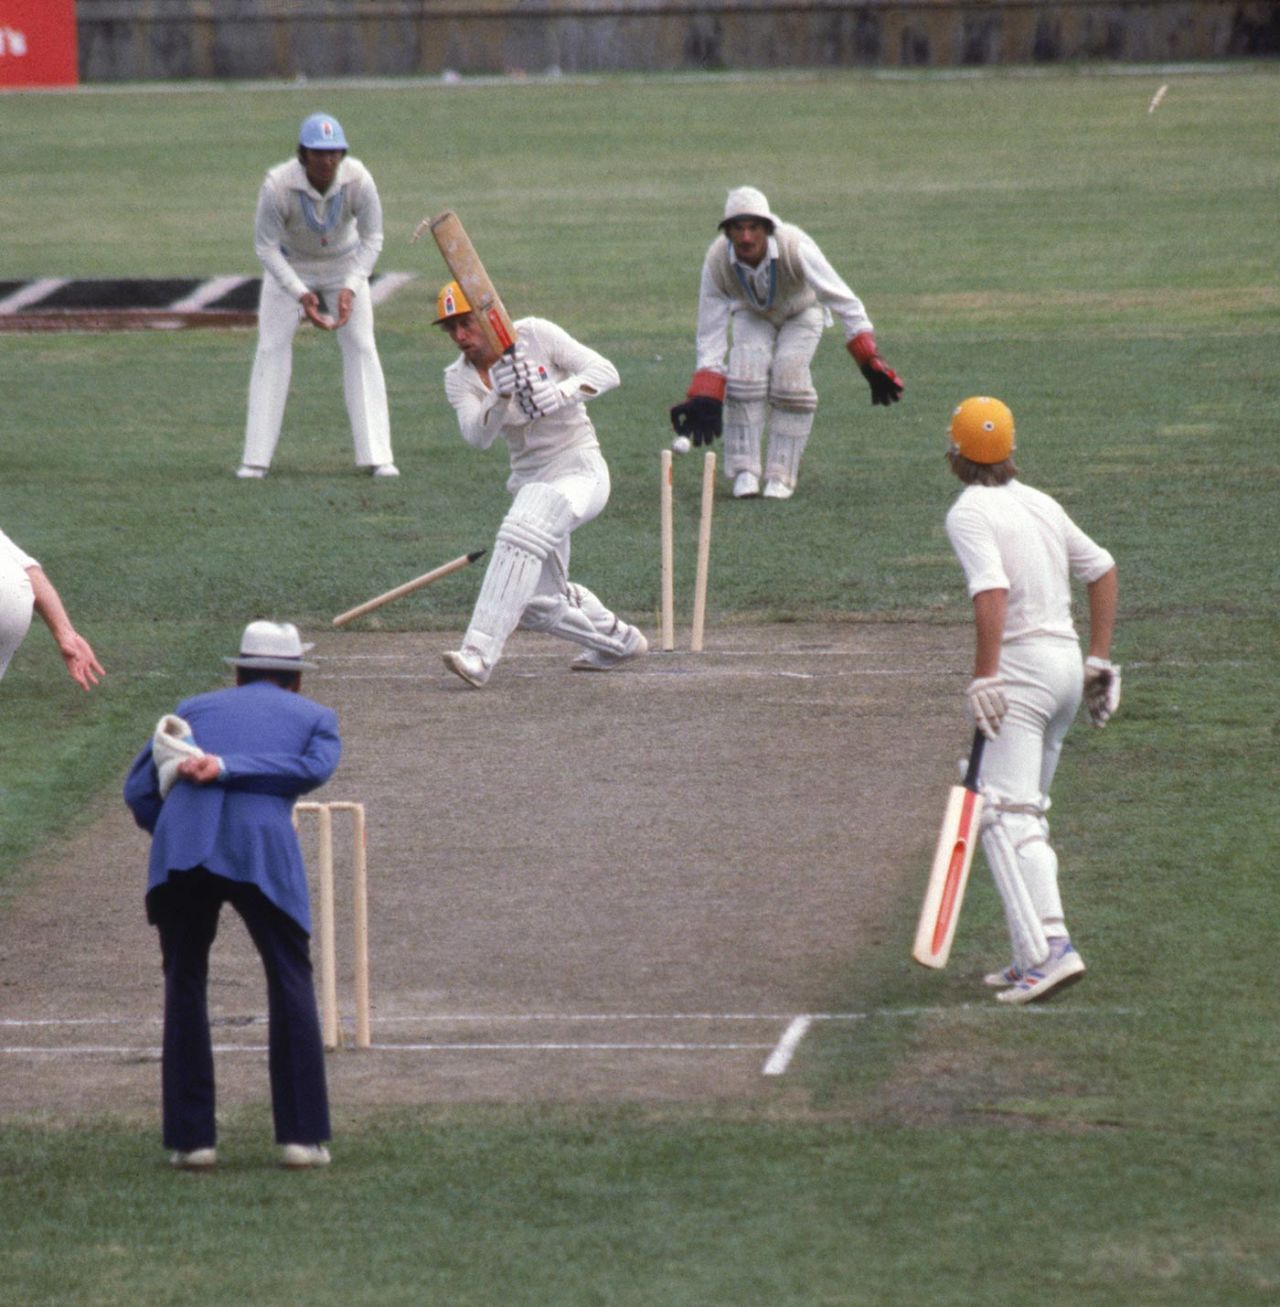 Ian Chappell is bowled by Garth Le Roux, Australia v Rest of the World, World Series Cricket Supertest, Melbourne, December 9, 1978 